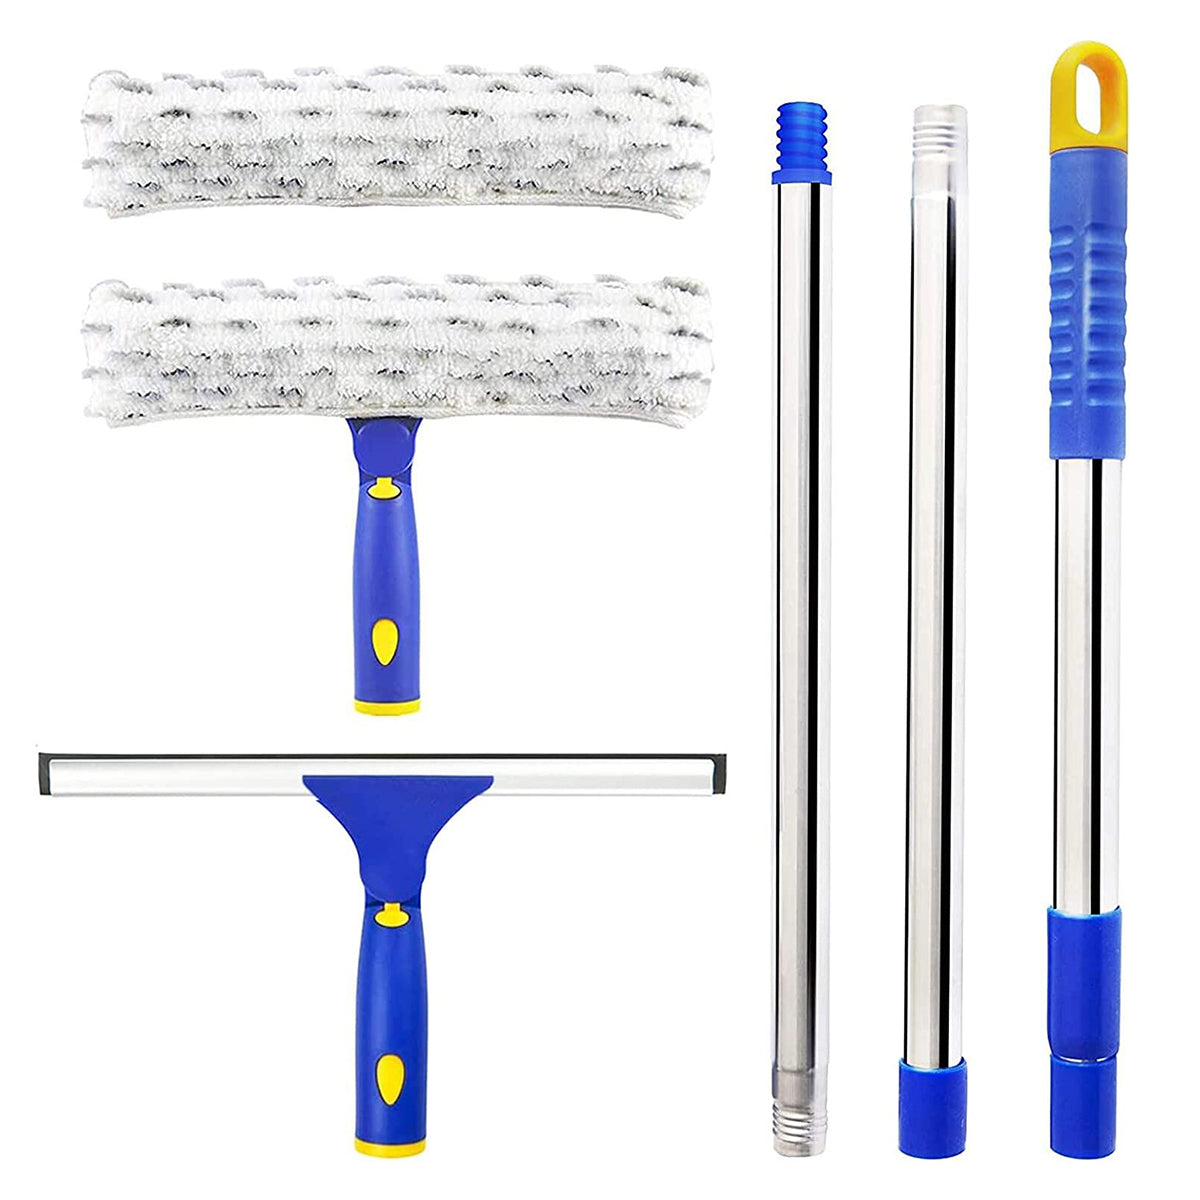 Glass Window Cleaning Squeegee Blade Wiper Cleaner Home Shower Bathroom K